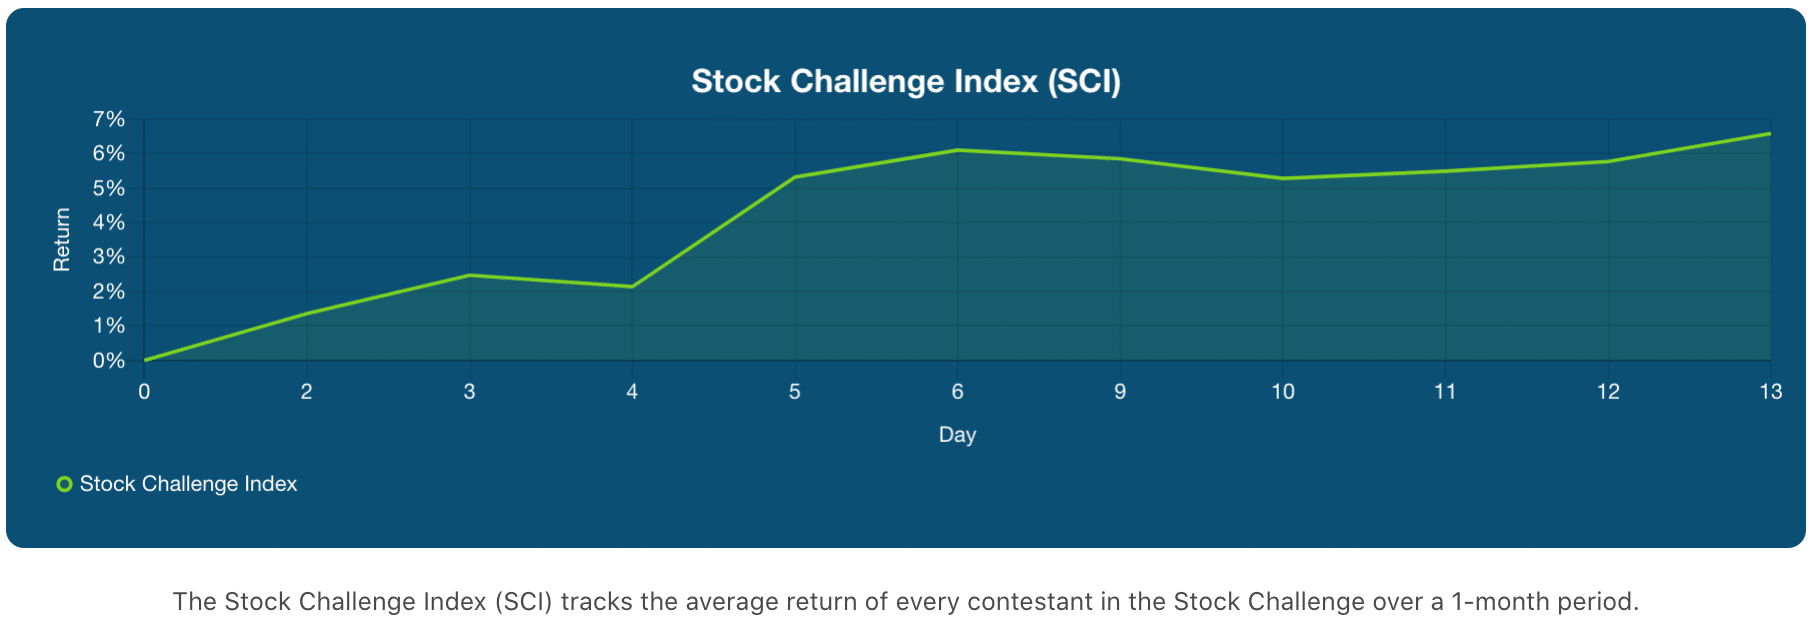 Stock Challenge Index (SCI) as of November 13, 2020